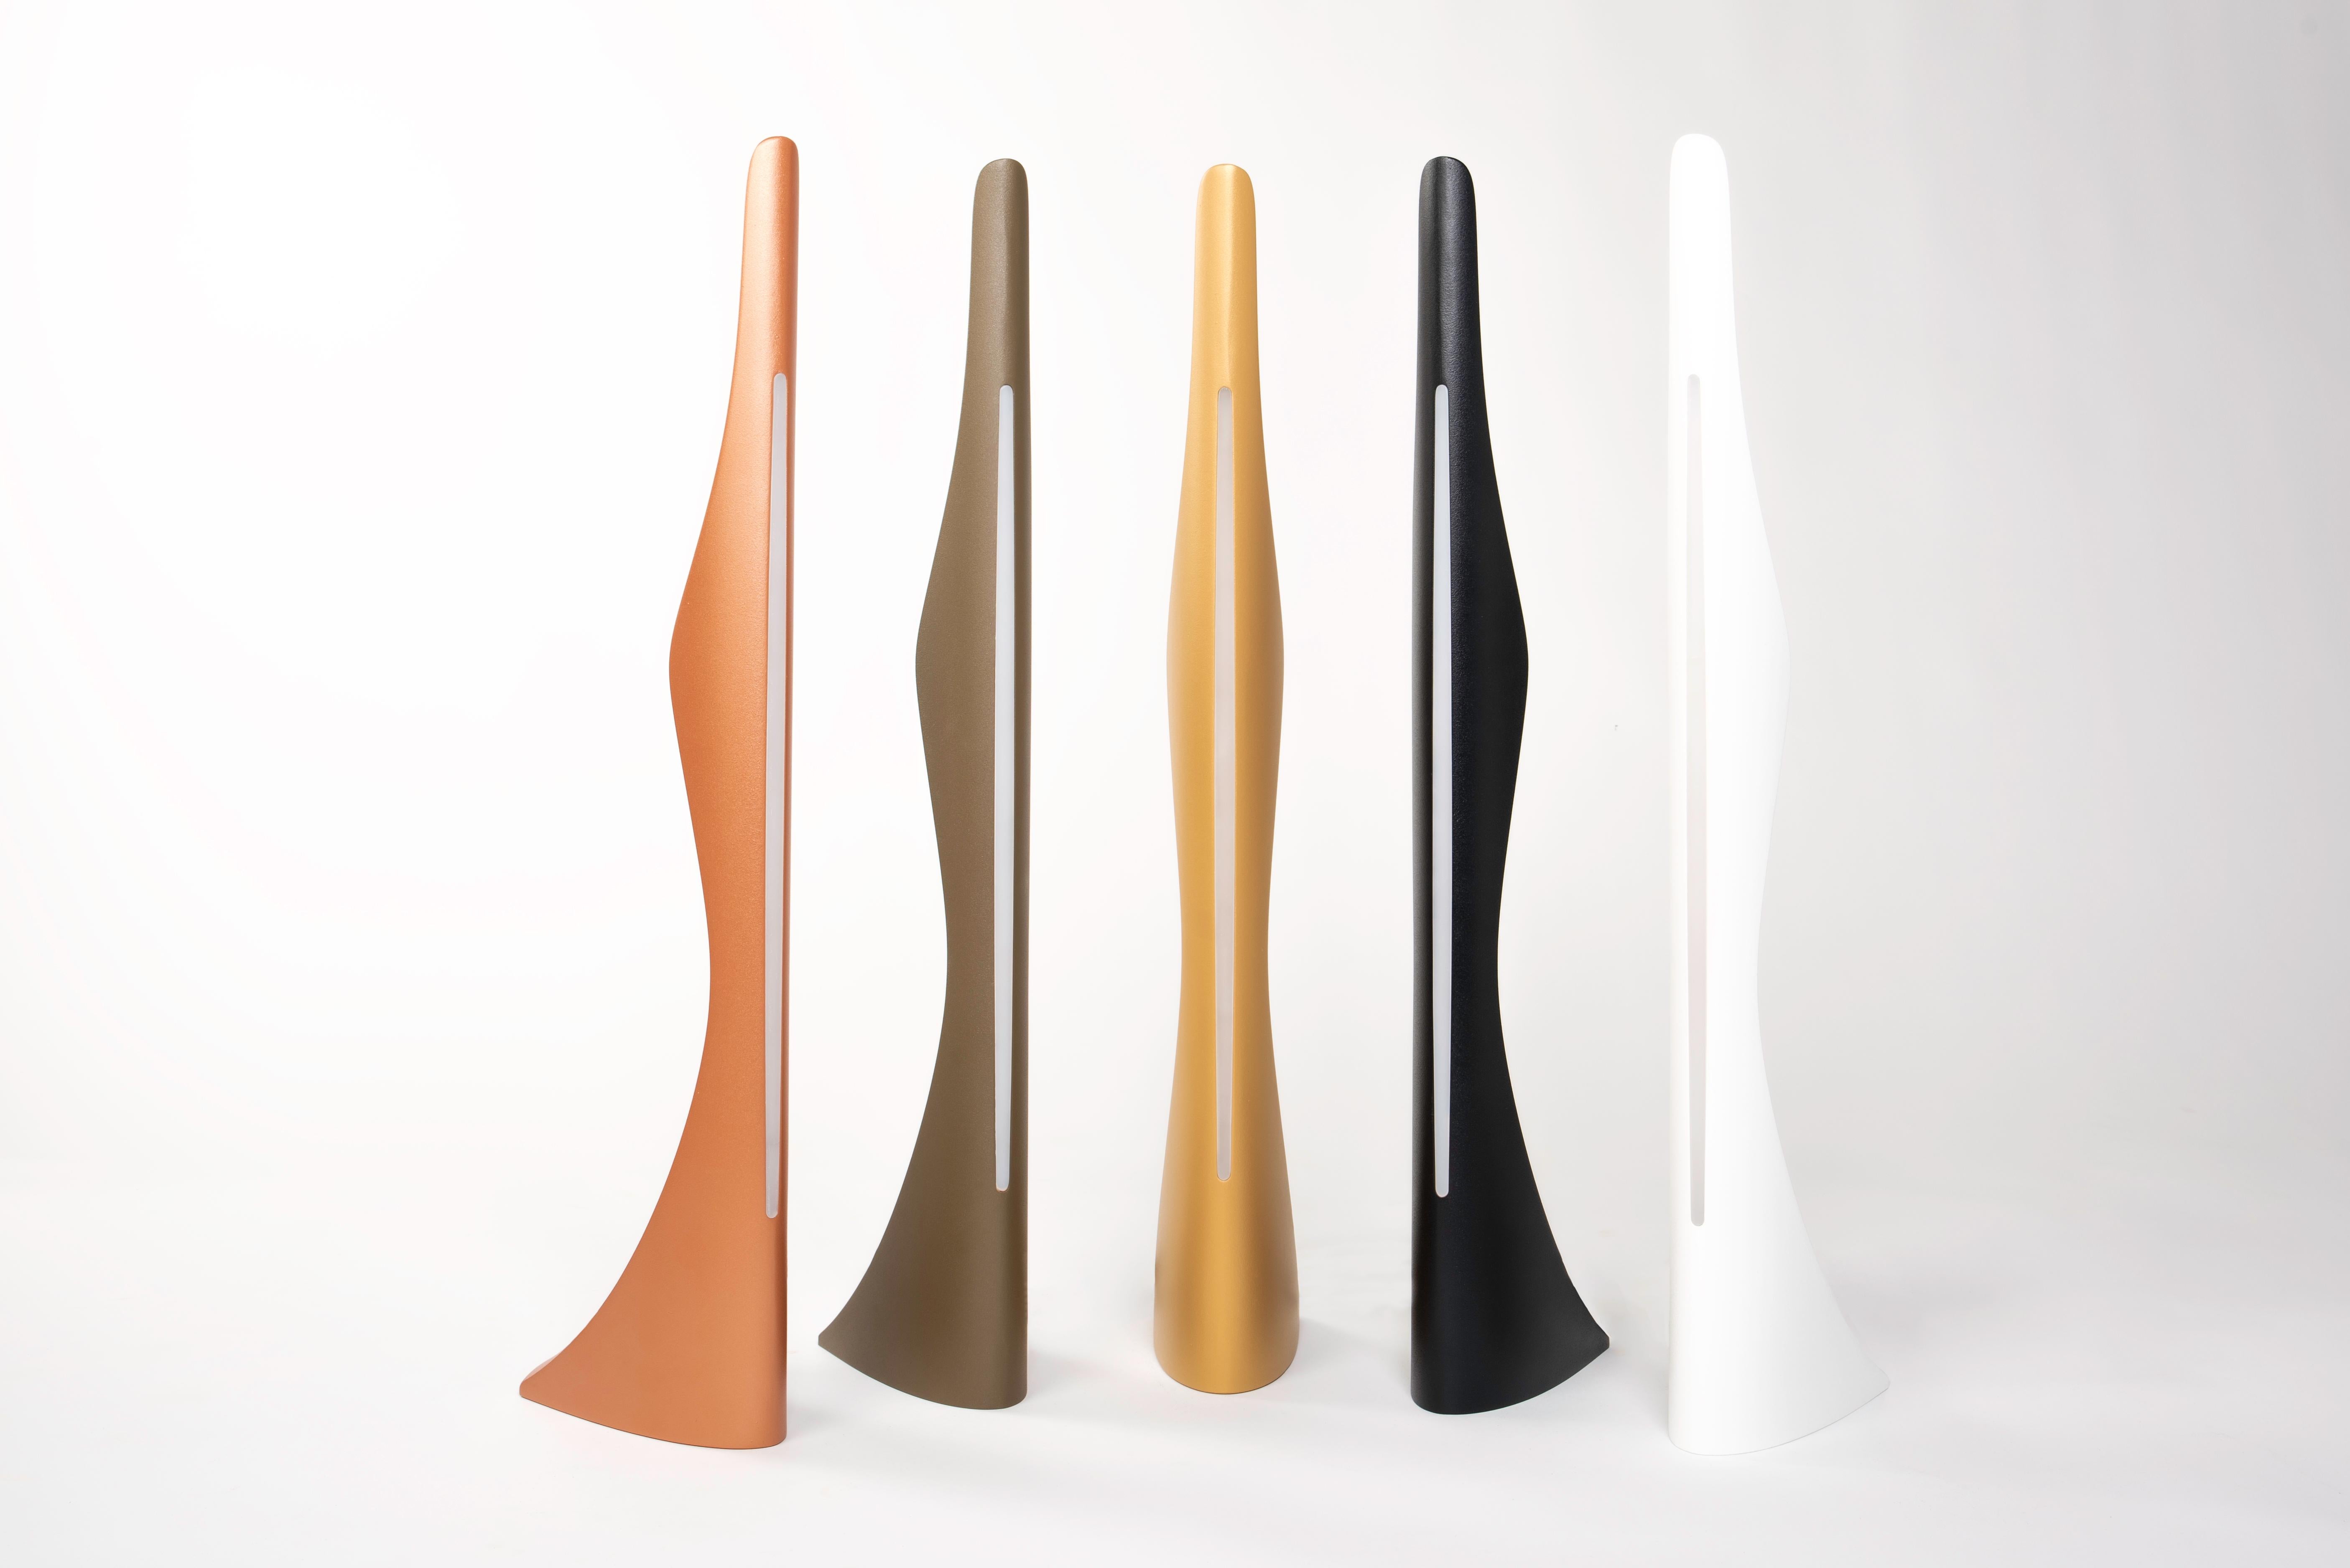 Modern by Cyril Rumpler Handmade Table Light Aluminium Silhouette Copper.
This light is inspired by the silhouette of a woman wearing a haute couture dress with its train and sheath. The dress is worn very close to the body and fits the shapes of